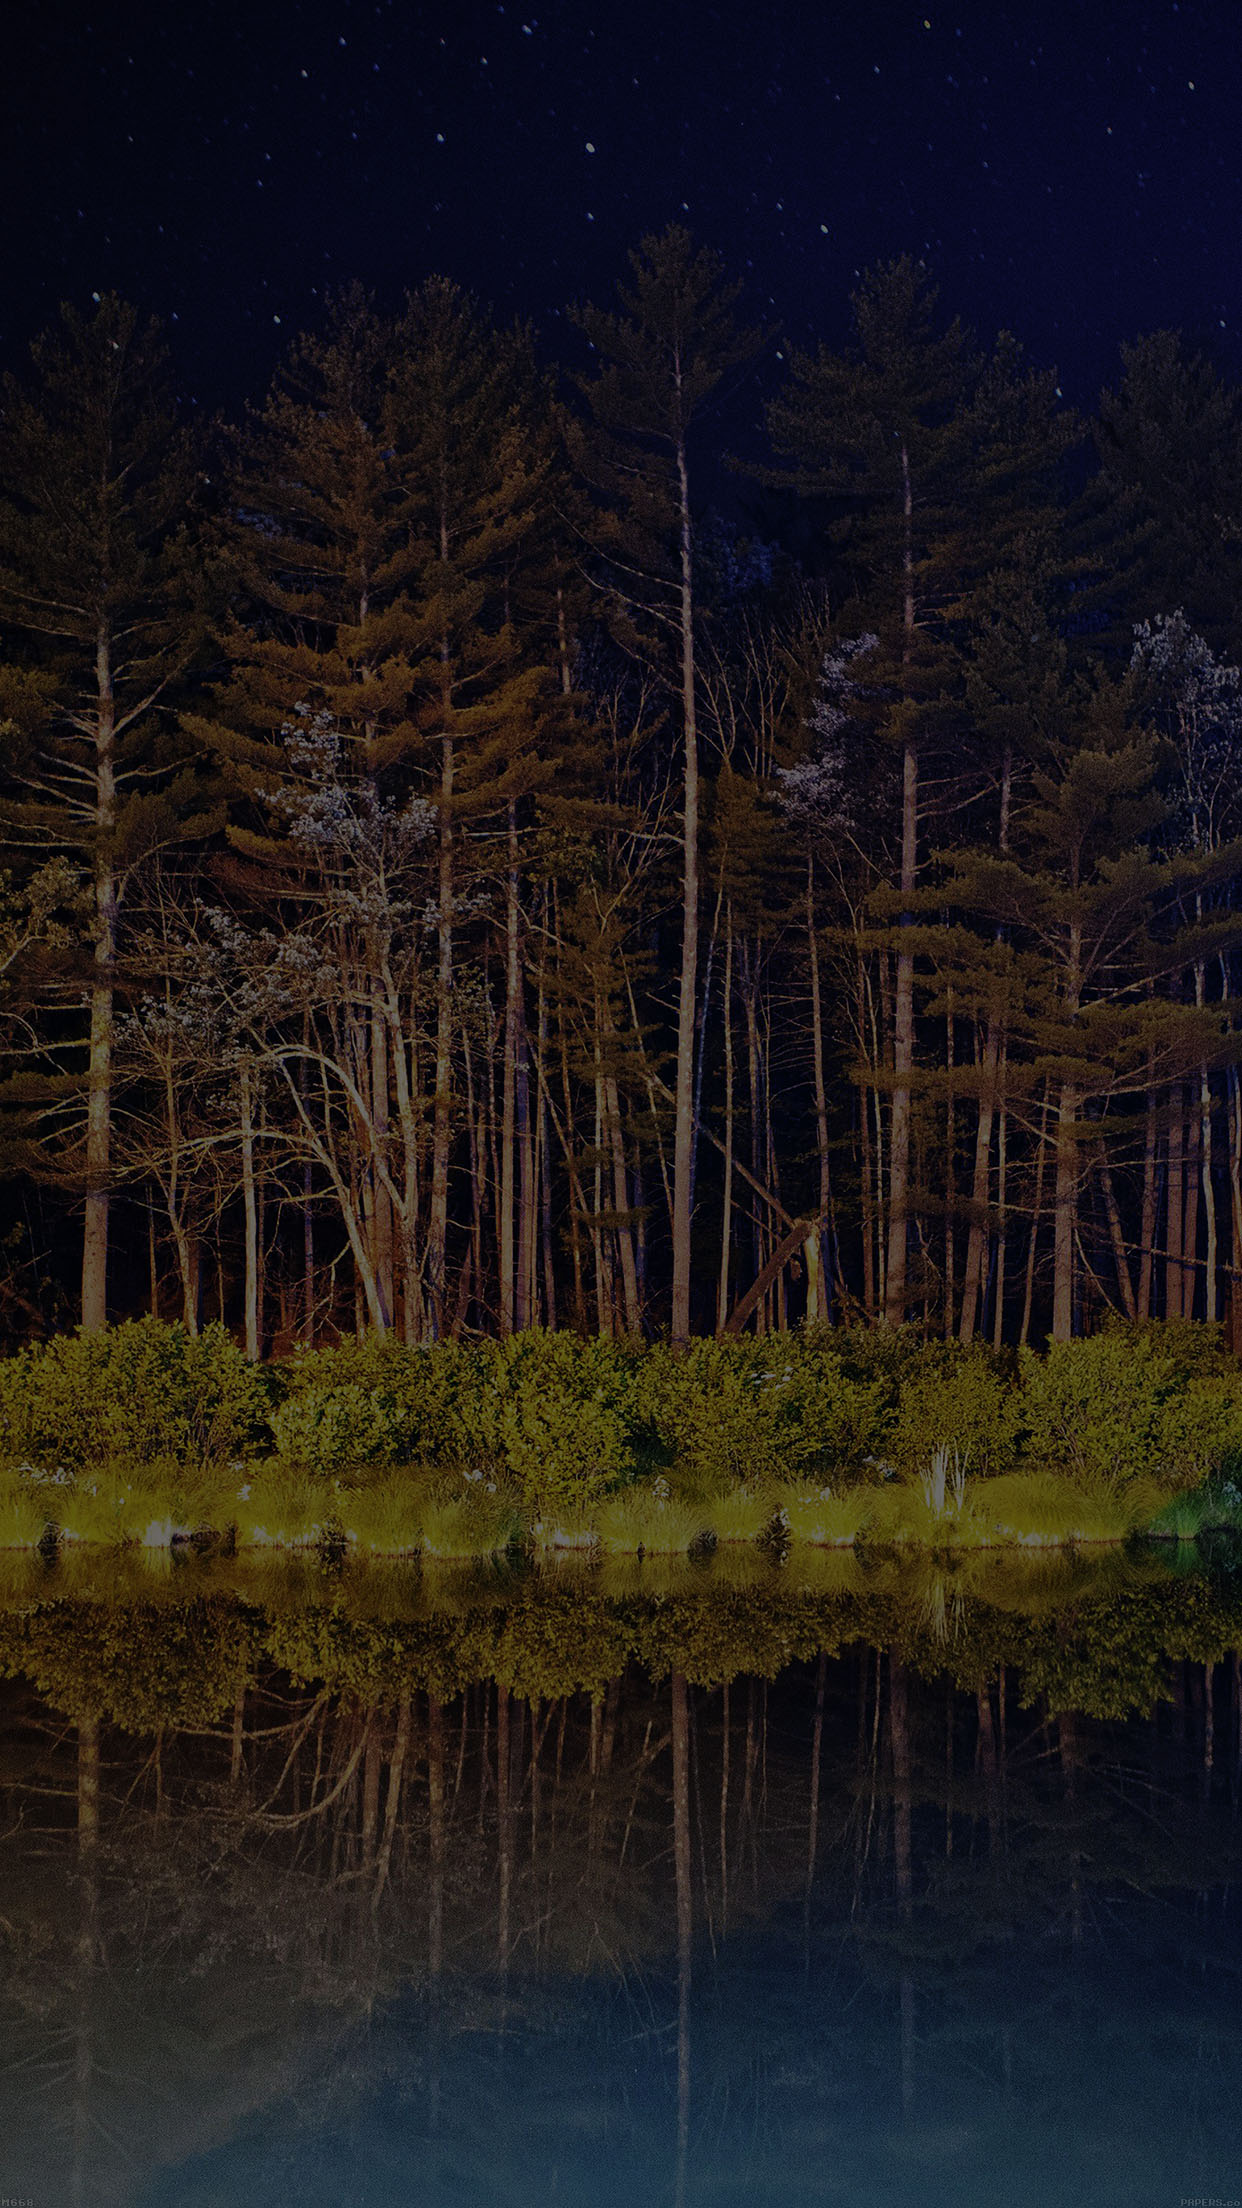 Night Dark Wood With Lake Nature Android wallpaper